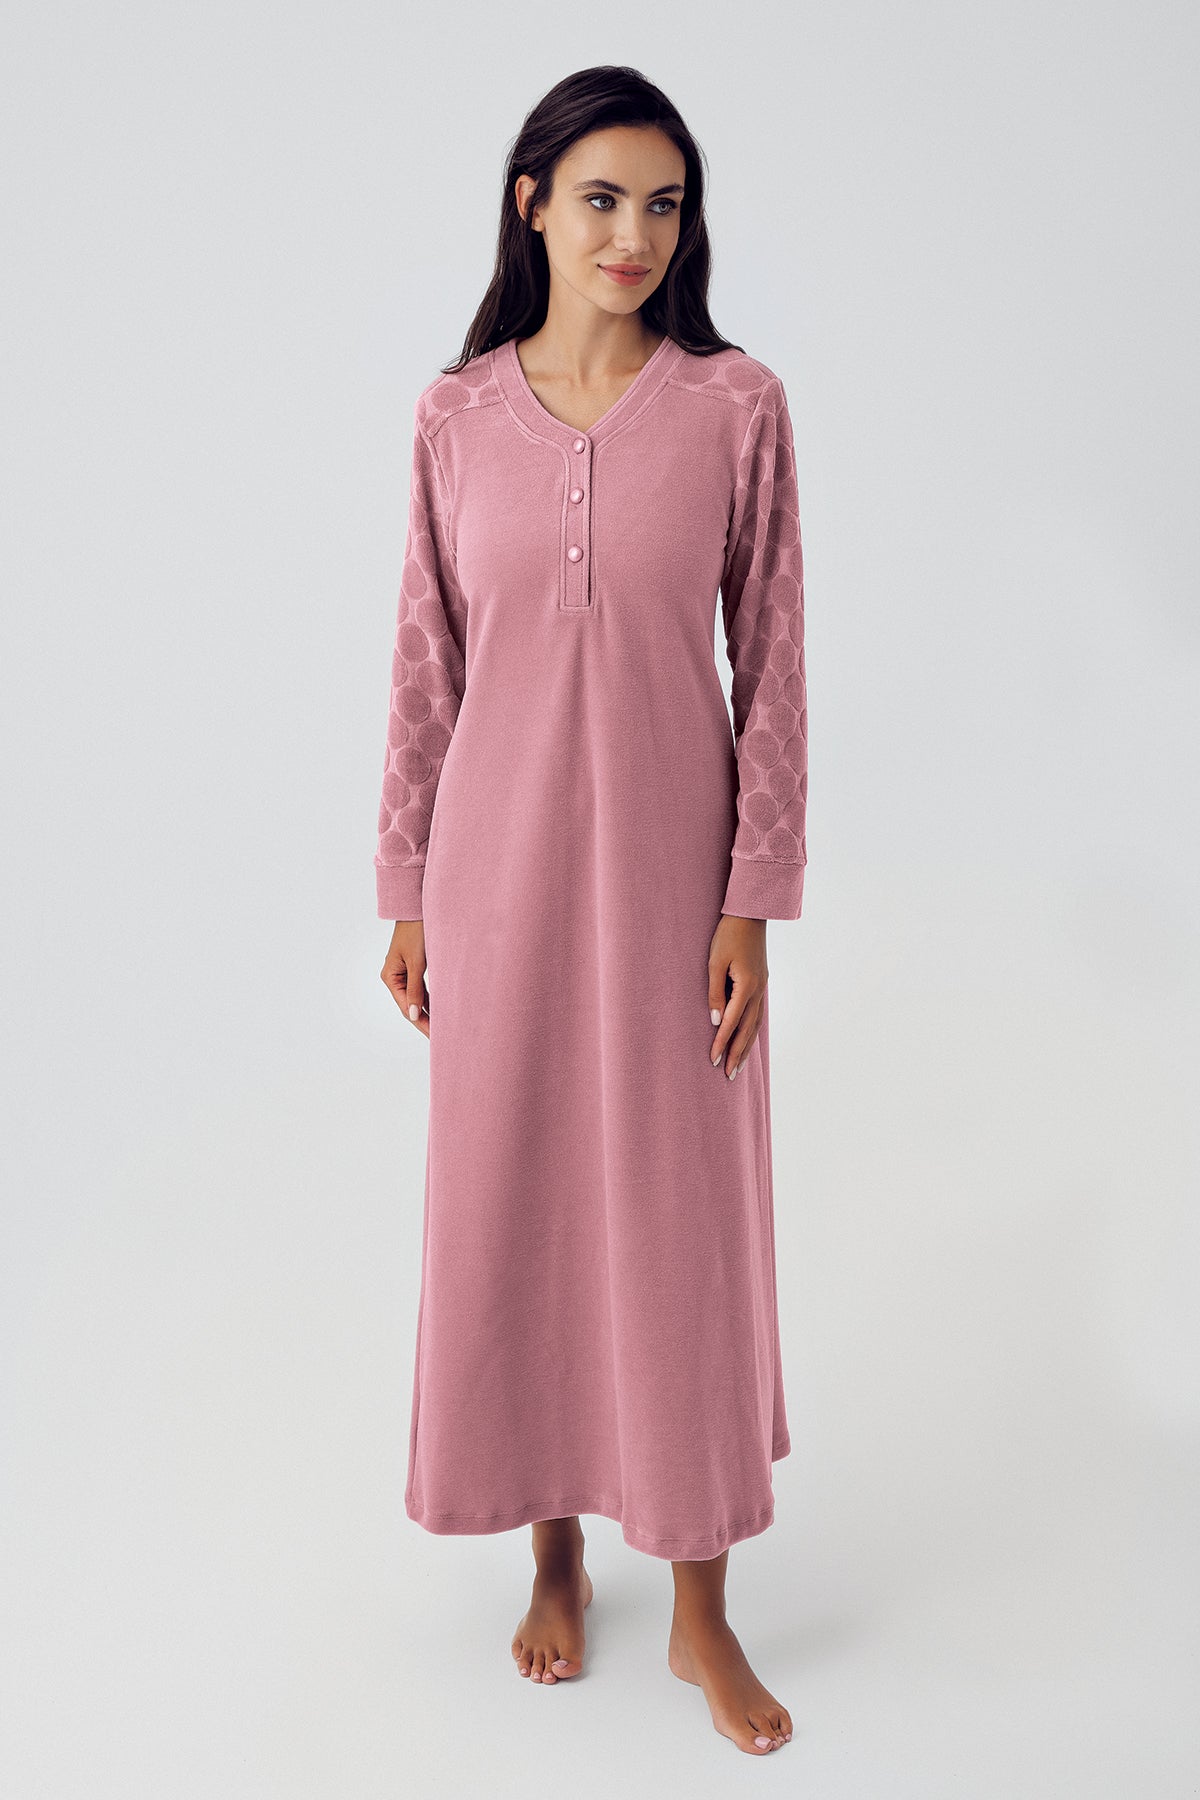 Shopymommy 15101 Terry Jacquard Maternity & Nursing Nightgown Dried Rose